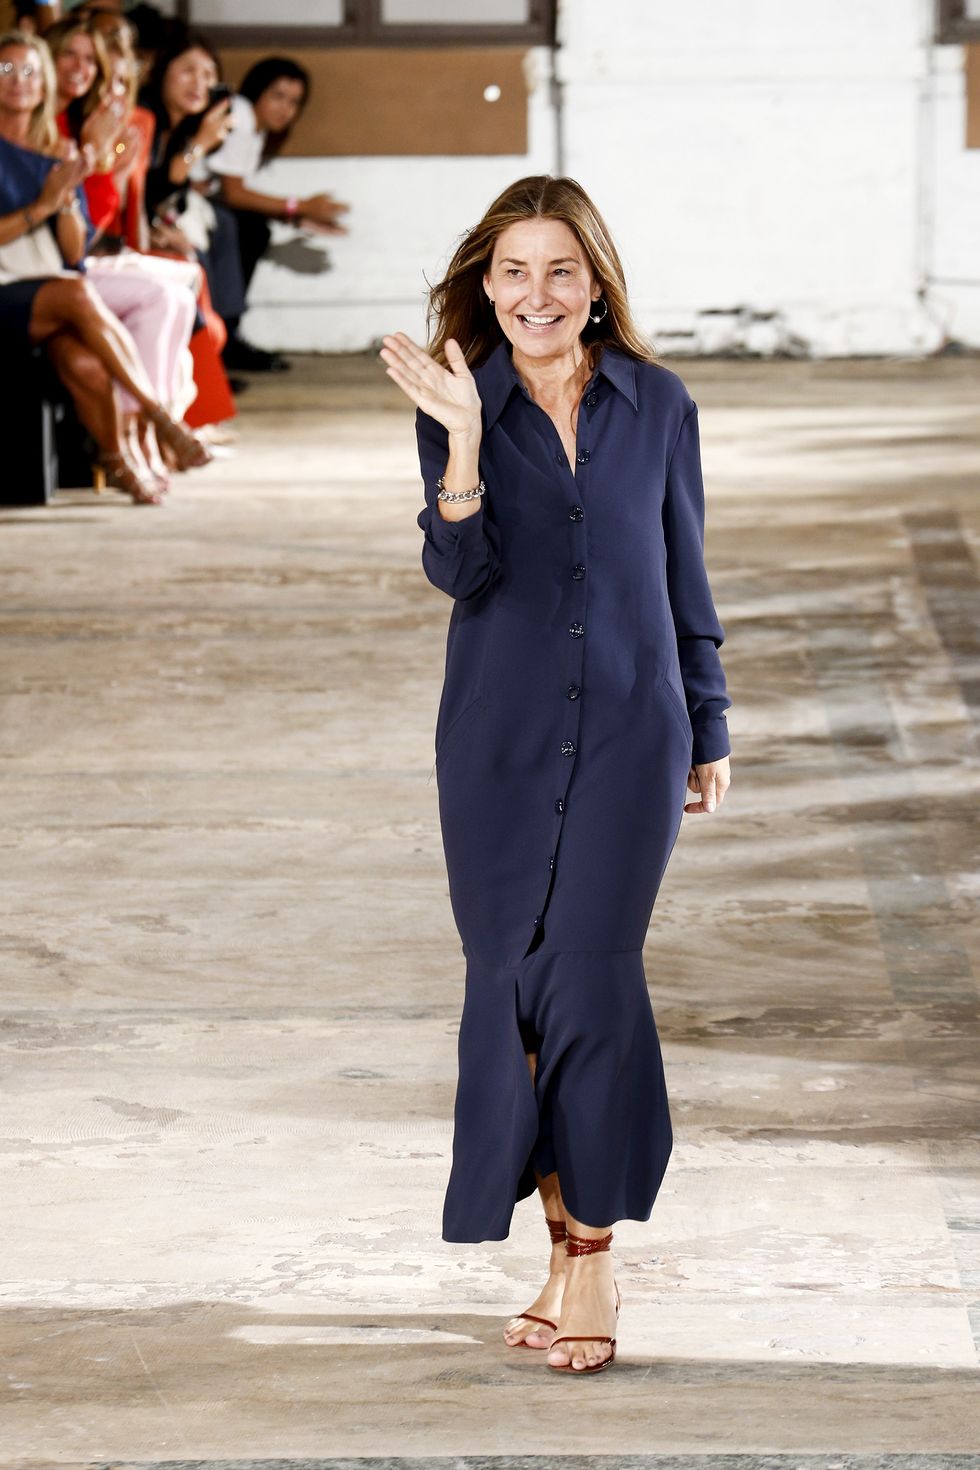 amy ﻿smilovic on the runway after her spring 2019 show wearing a long sleek navy shirt dress and simple brown sandals